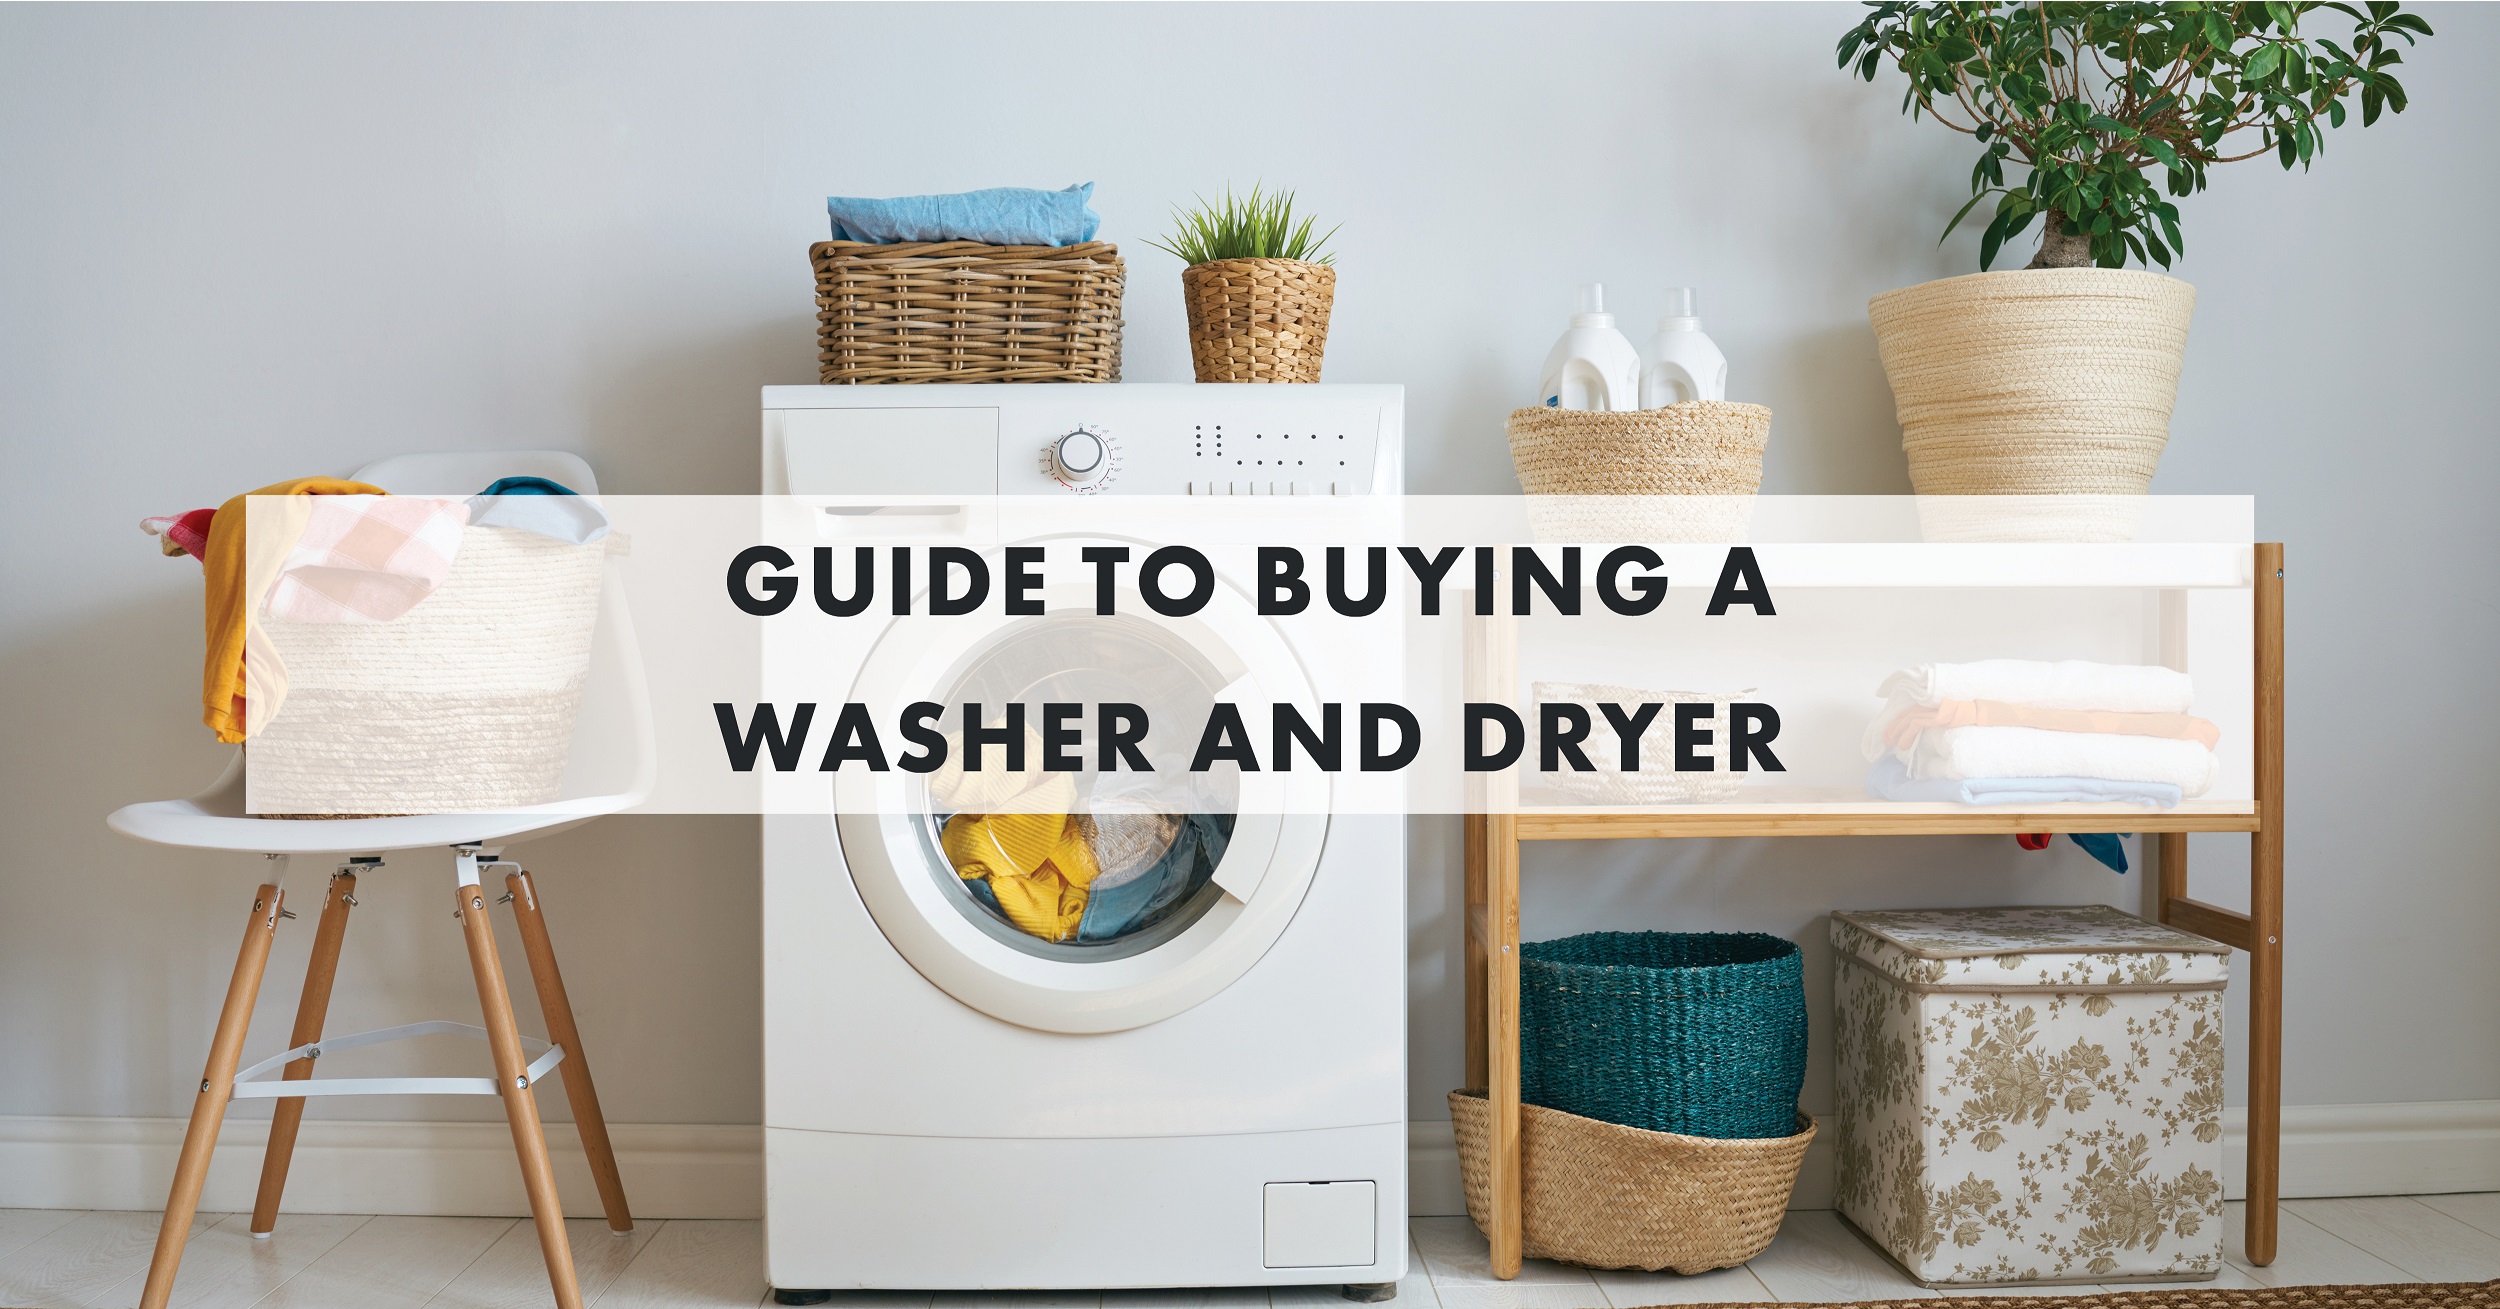 Guide to Buying a Washer and Dryer